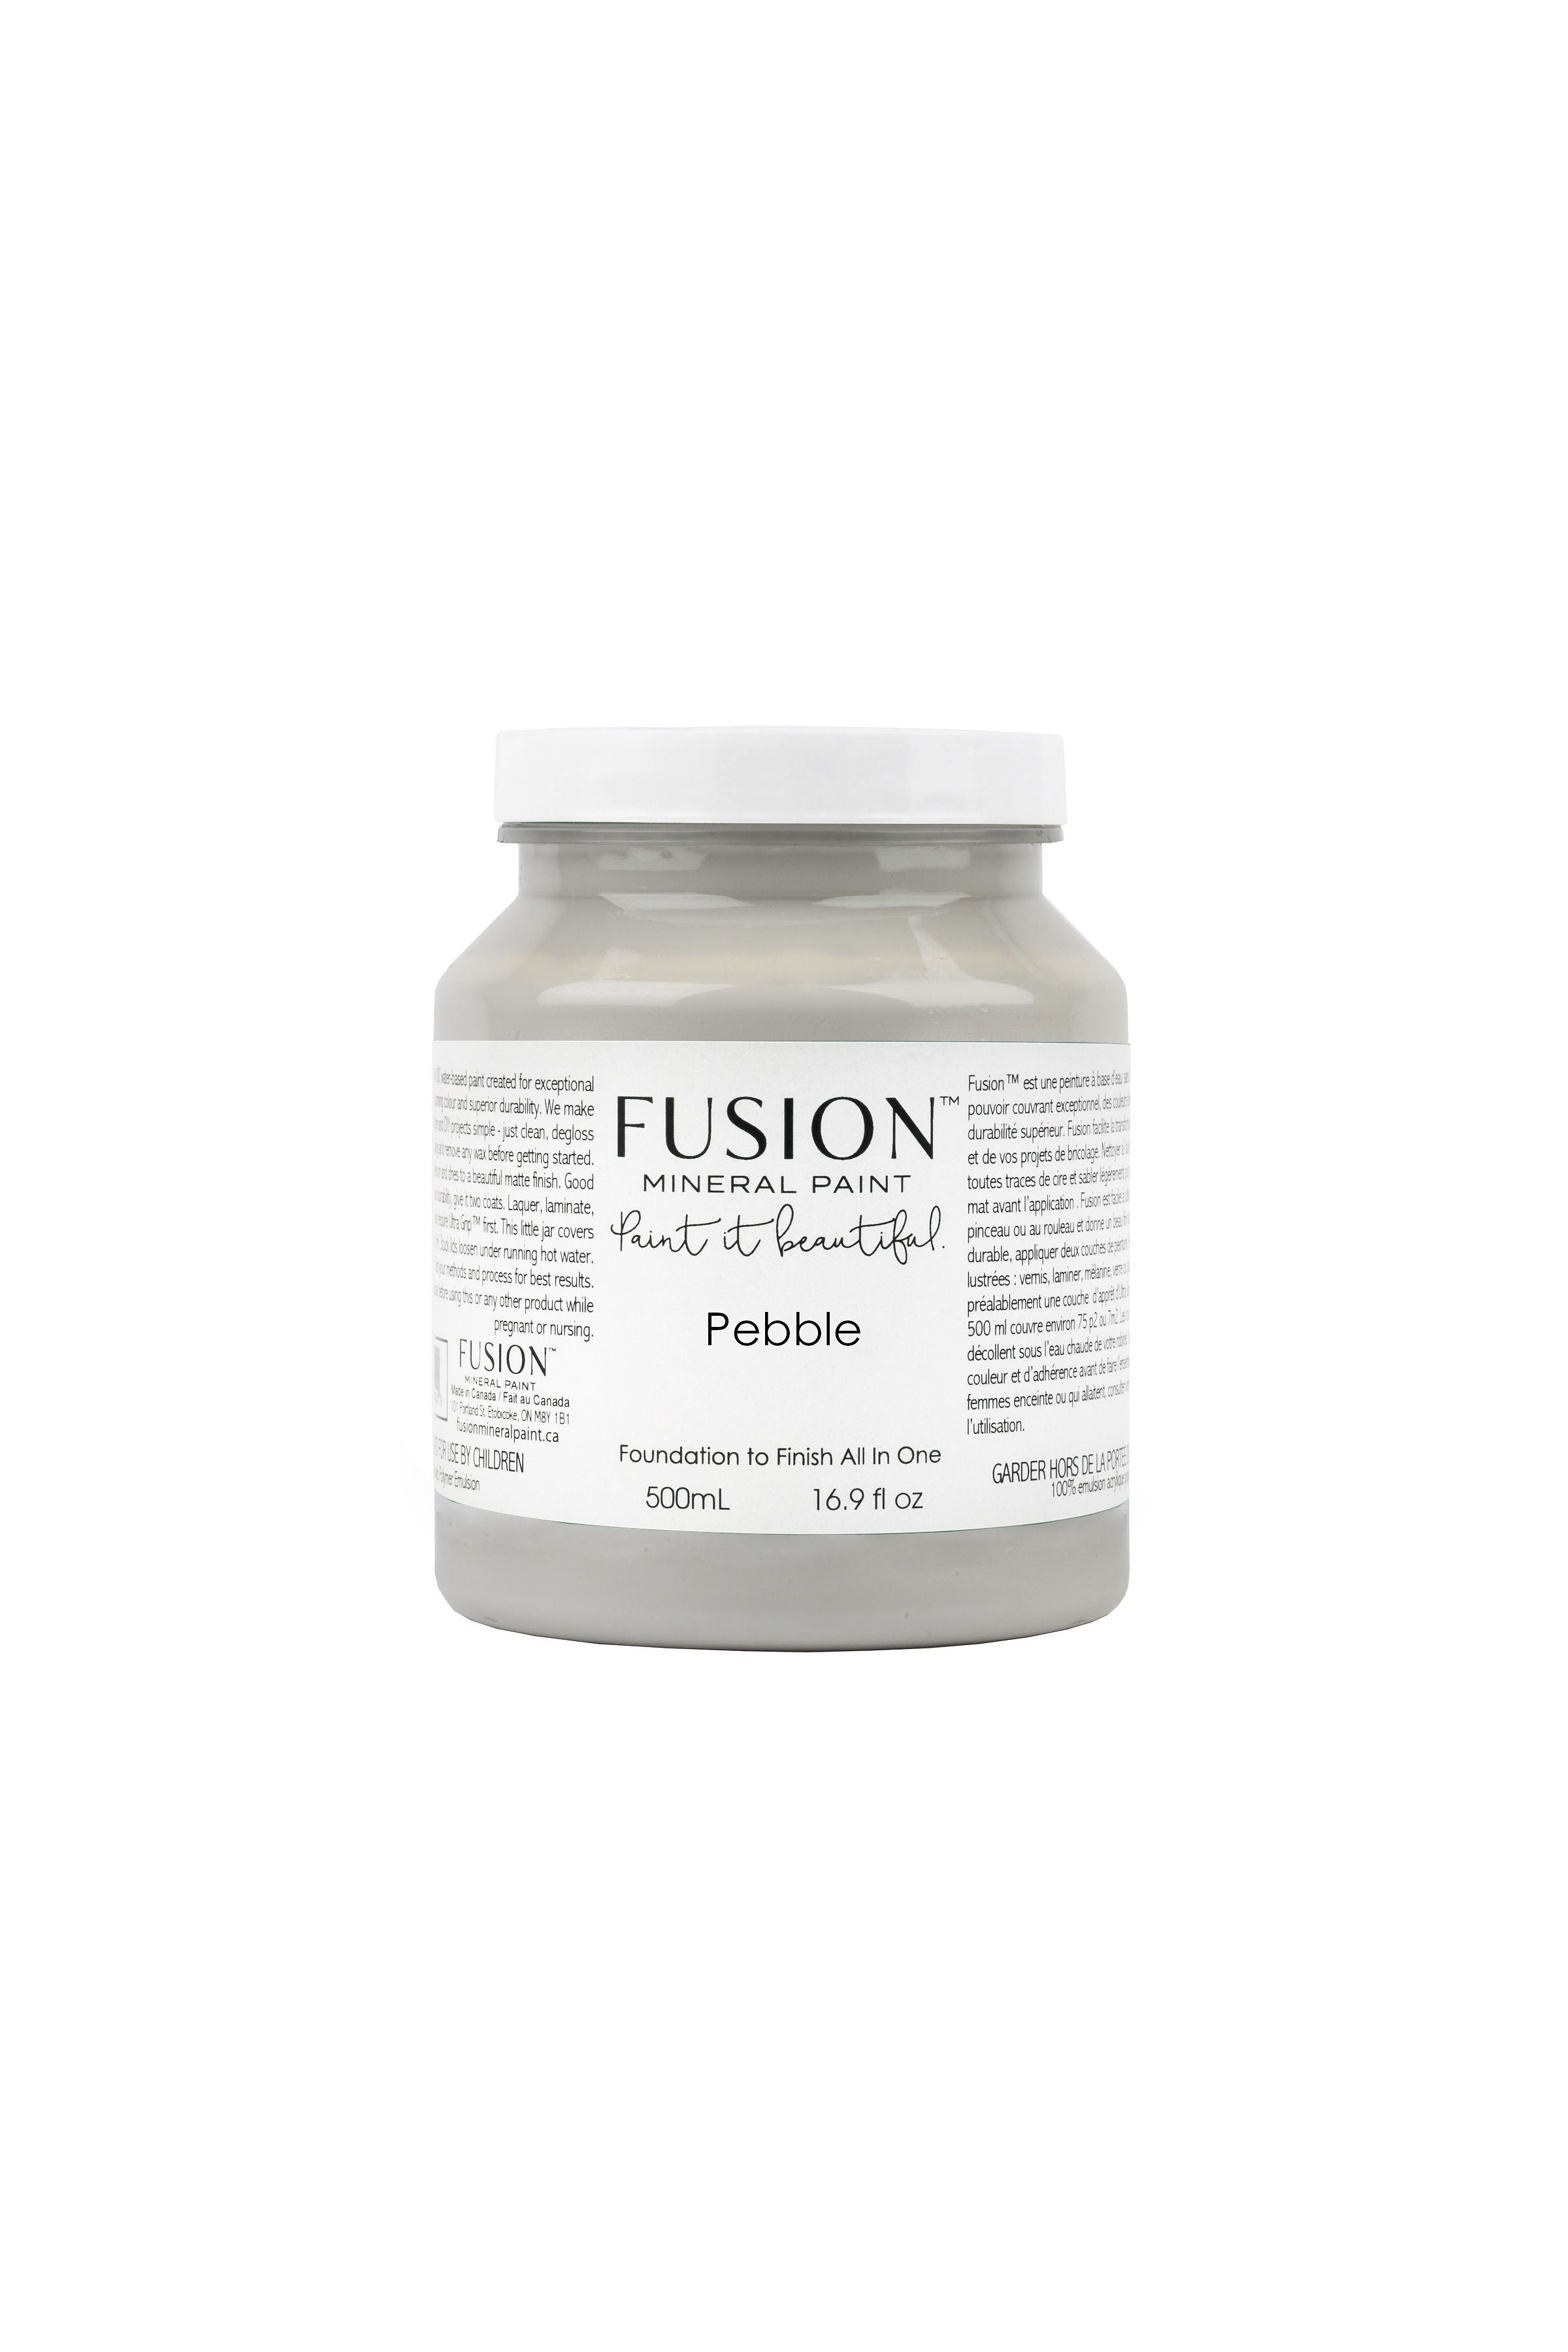 Pebble - Fusion Mineral Paint - 500ml Pint *RETIRED*